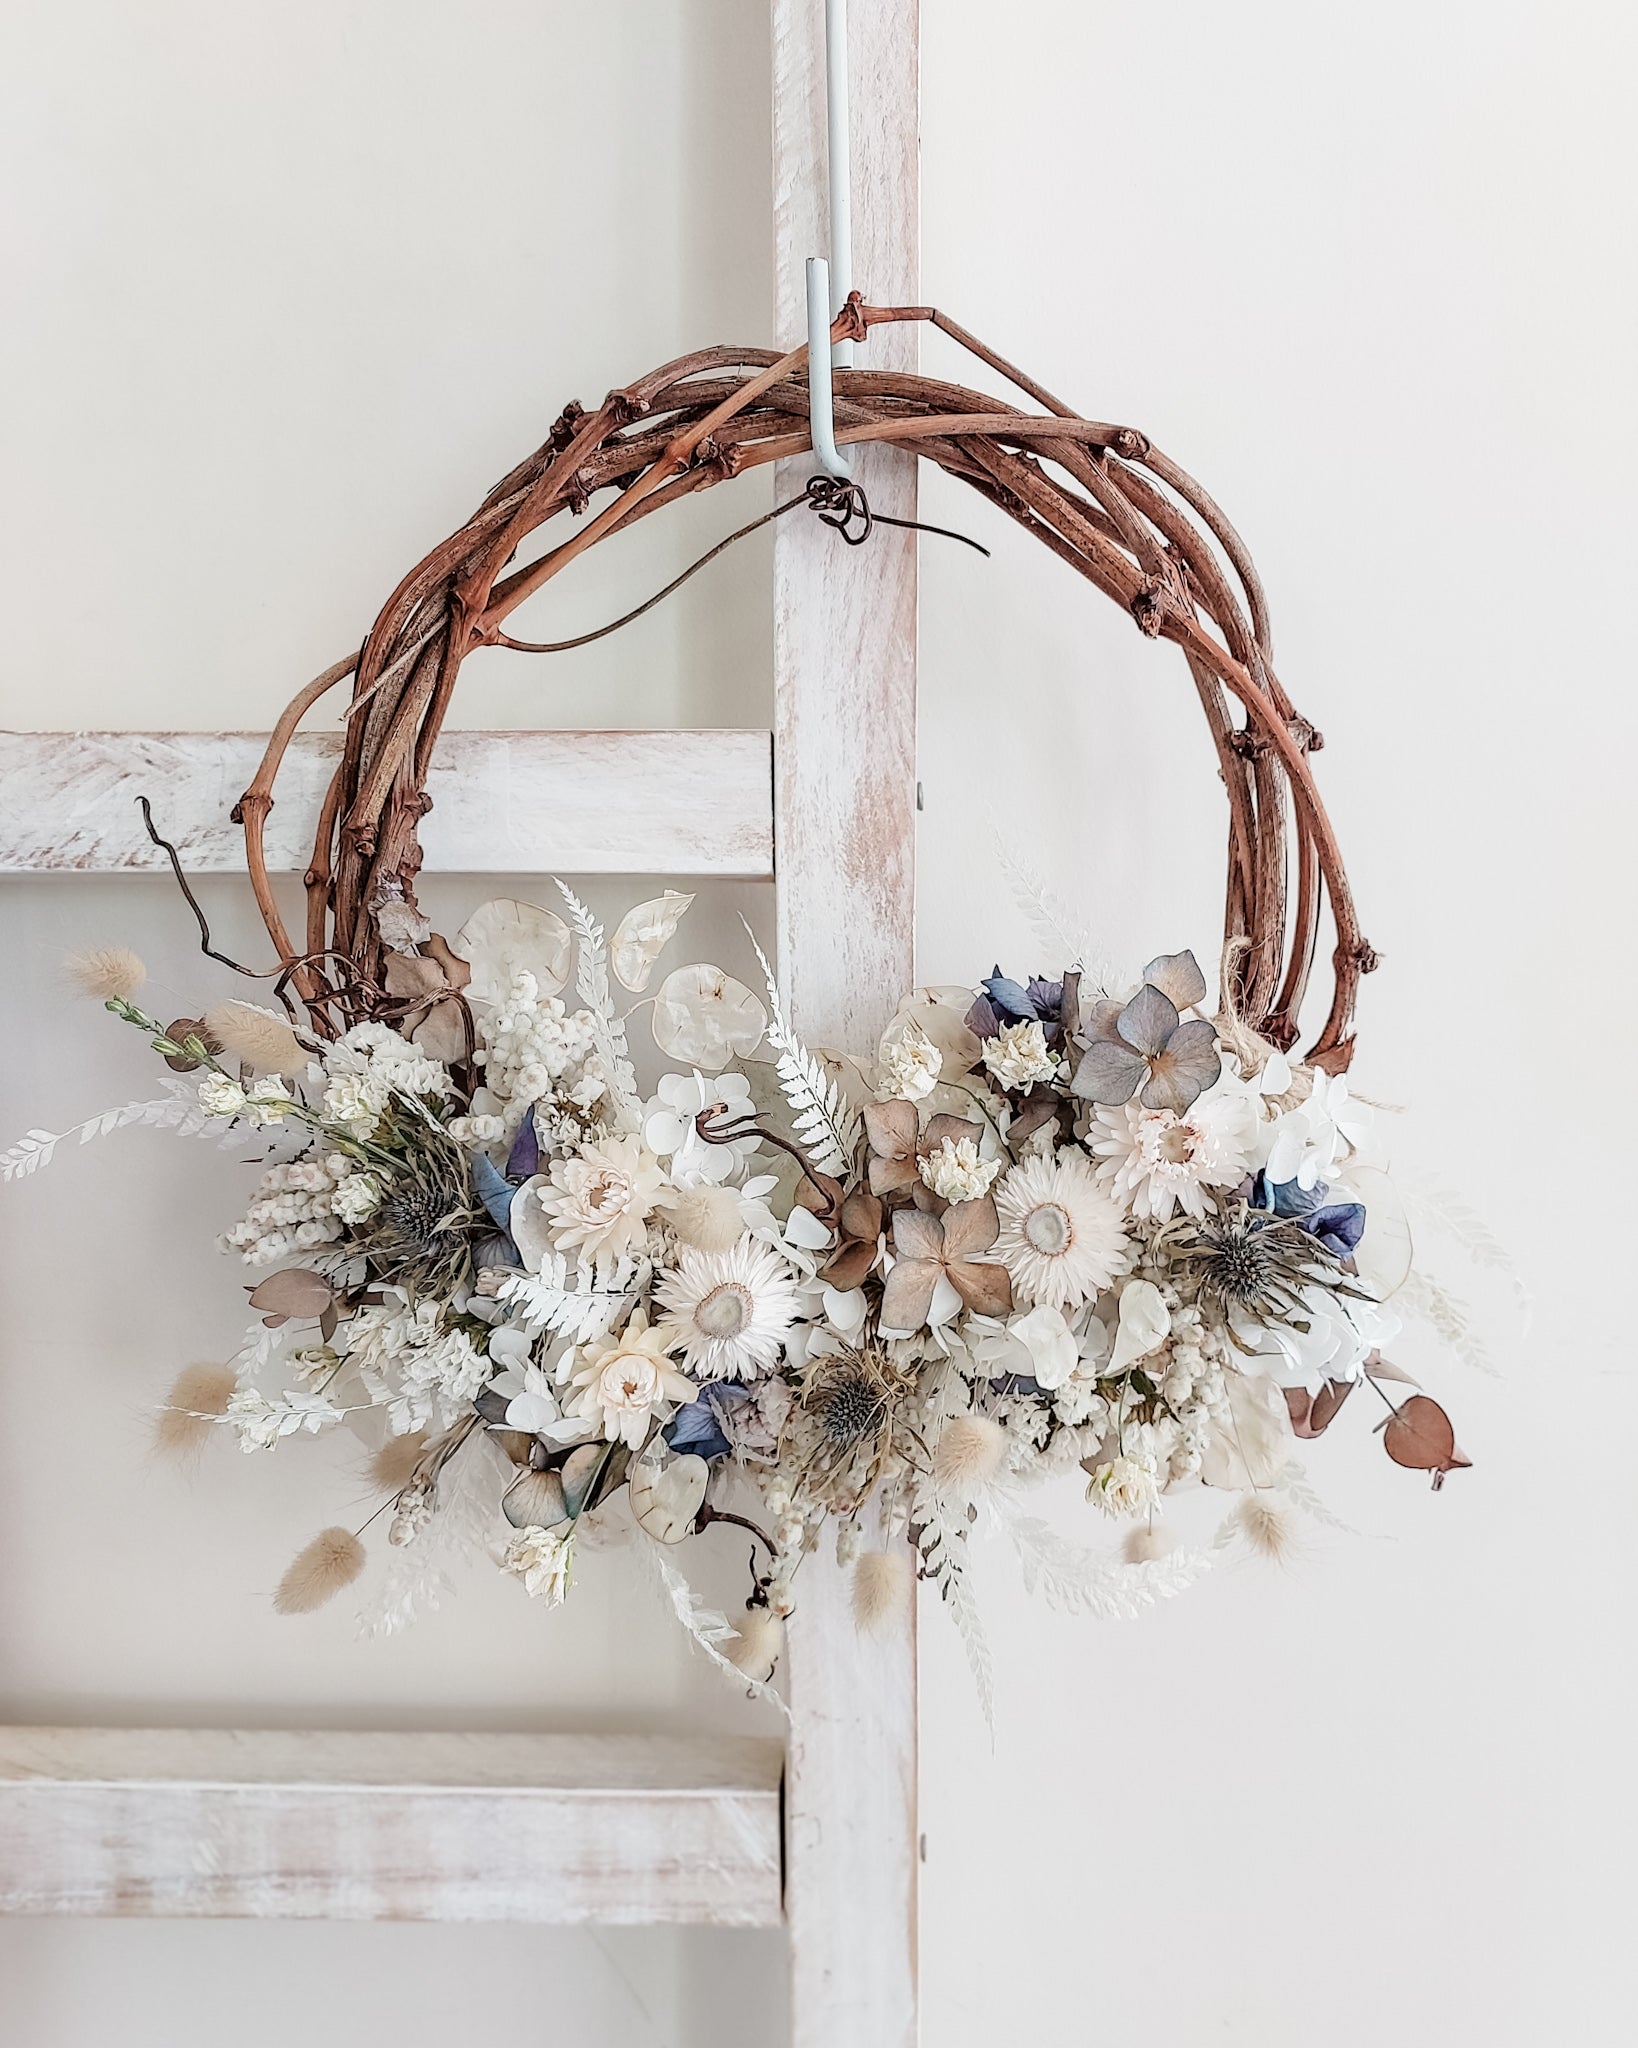 Dried flower wreath in soft blue and neutral tones on a grapevine base.